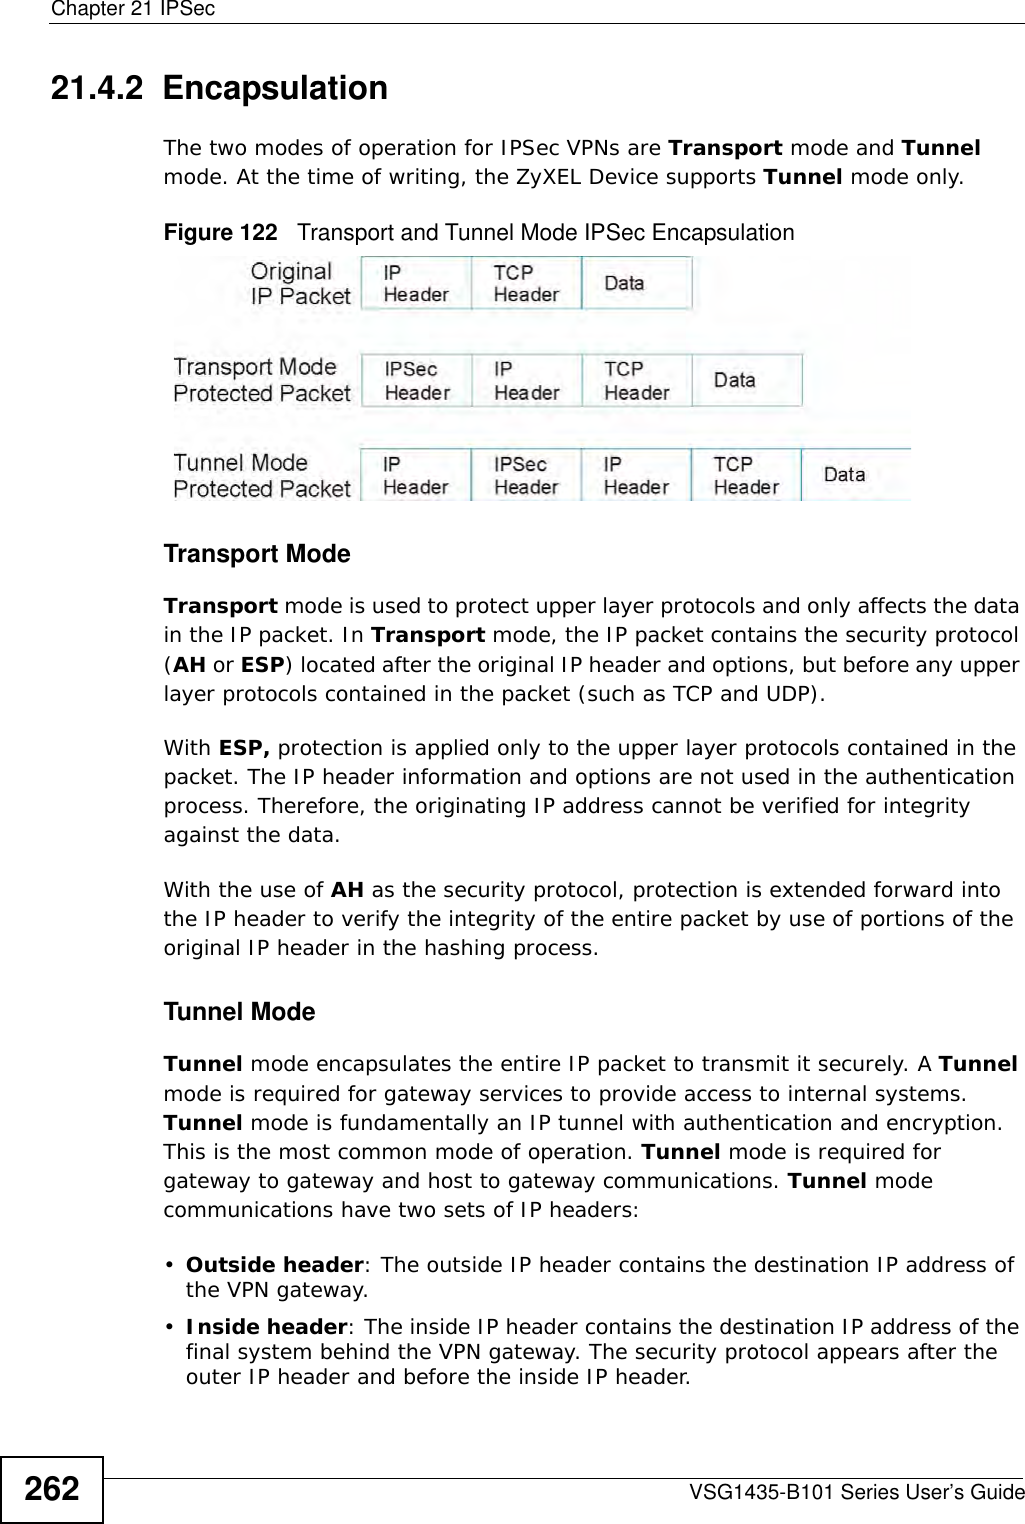 Chapter 21 IPSecVSG1435-B101 Series User’s Guide26221.4.2  EncapsulationThe two modes of operation for IPSec VPNs are Transport mode and Tunnel mode. At the time of writing, the ZyXEL Device supports Tunnel mode only.Figure 122   Transport and Tunnel Mode IPSec EncapsulationTransport ModeTransport mode is used to protect upper layer protocols and only affects the data in the IP packet. In Transport mode, the IP packet contains the security protocol (AH or ESP) located after the original IP header and options, but before any upper layer protocols contained in the packet (such as TCP and UDP). With ESP, protection is applied only to the upper layer protocols contained in the packet. The IP header information and options are not used in the authentication process. Therefore, the originating IP address cannot be verified for integrity against the data. With the use of AH as the security protocol, protection is extended forward into the IP header to verify the integrity of the entire packet by use of portions of the original IP header in the hashing process.Tunnel Mode Tunnel mode encapsulates the entire IP packet to transmit it securely. A Tunnel mode is required for gateway services to provide access to internal systems. Tunnel mode is fundamentally an IP tunnel with authentication and encryption. This is the most common mode of operation. Tunnel mode is required for gateway to gateway and host to gateway communications. Tunnel mode communications have two sets of IP headers:•Outside header: The outside IP header contains the destination IP address of the VPN gateway.•Inside header: The inside IP header contains the destination IP address of the final system behind the VPN gateway. The security protocol appears after the outer IP header and before the inside IP header. 